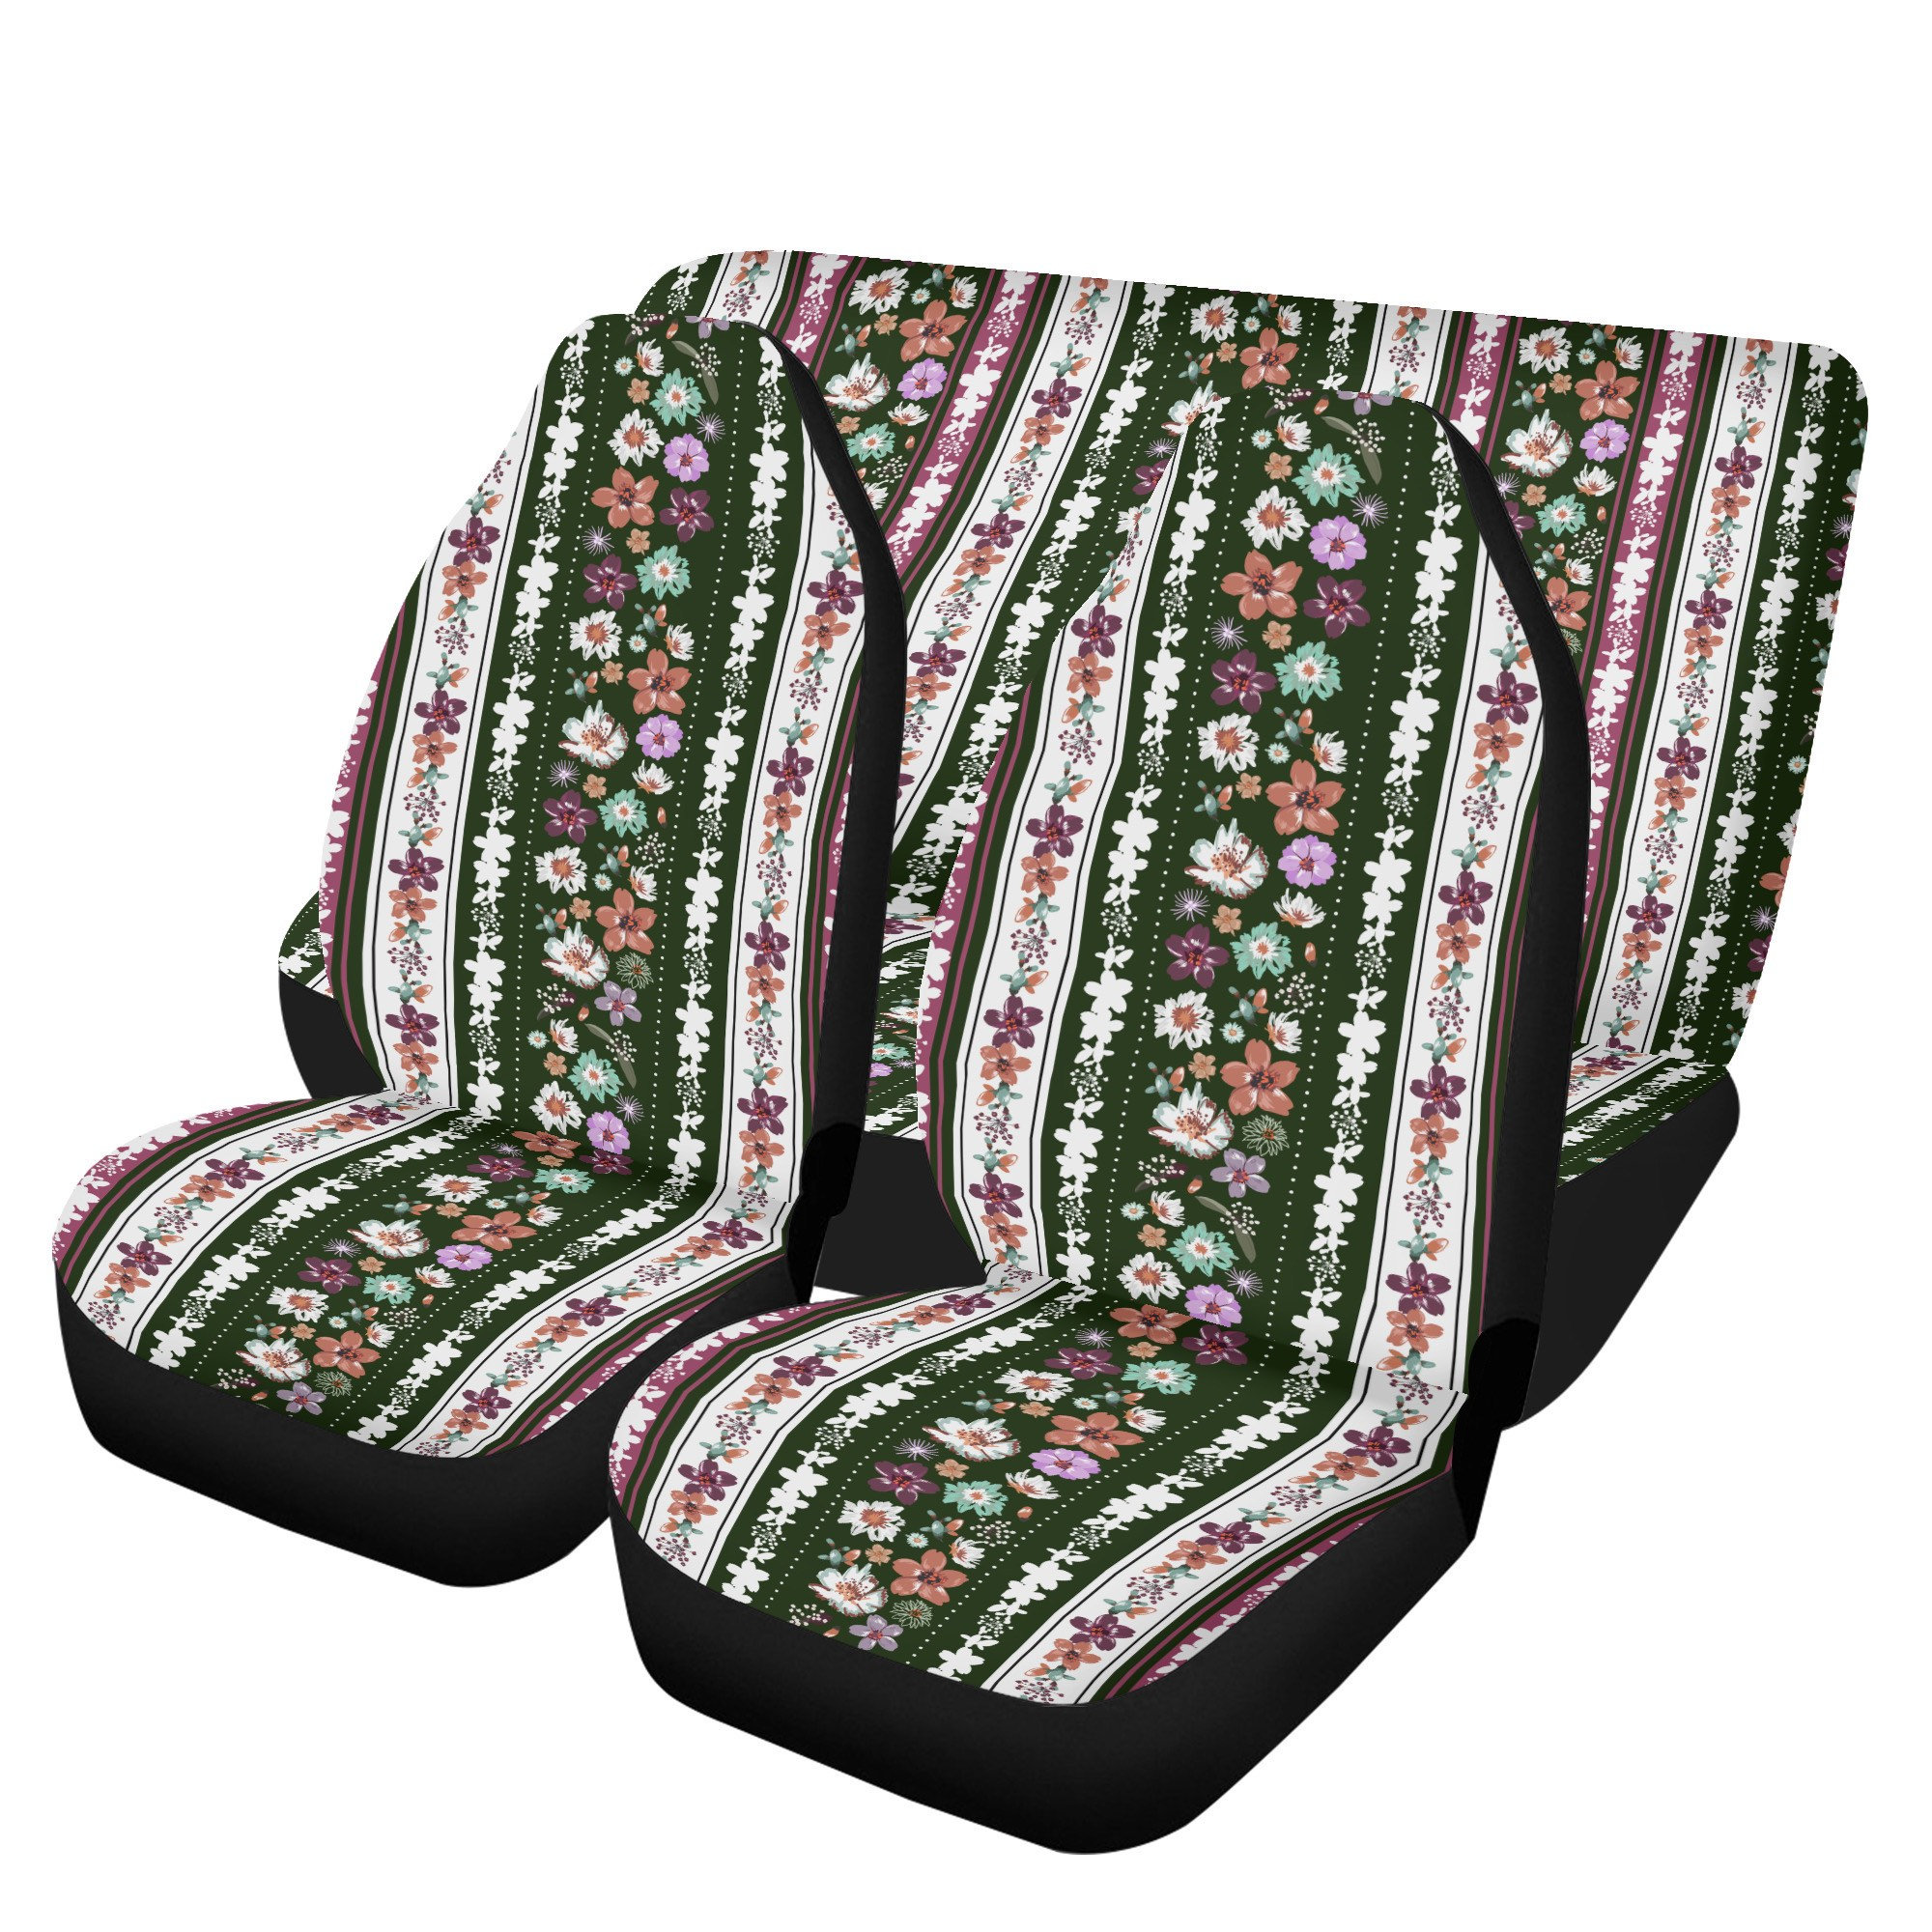 Faux Embroidery Print Wildflower Car Seat Covers for Vehicle, Cottagecore  Boho Floral, Cute Car Accessories for Women New Driver Gift 